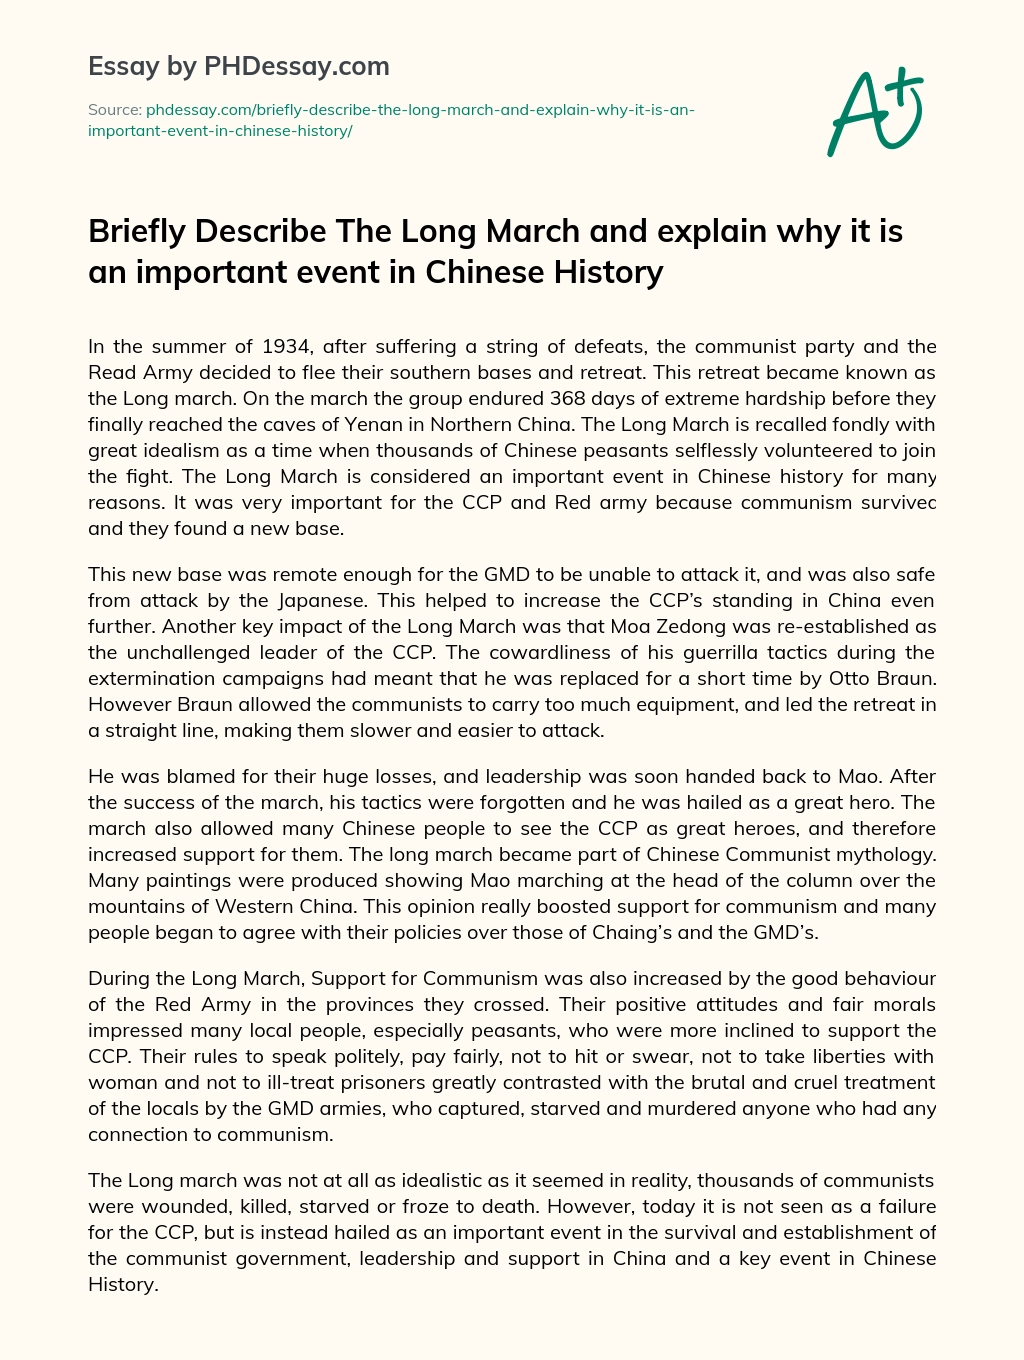 Briefly Describe The Long March and explain why it is an important event in Chinese History essay